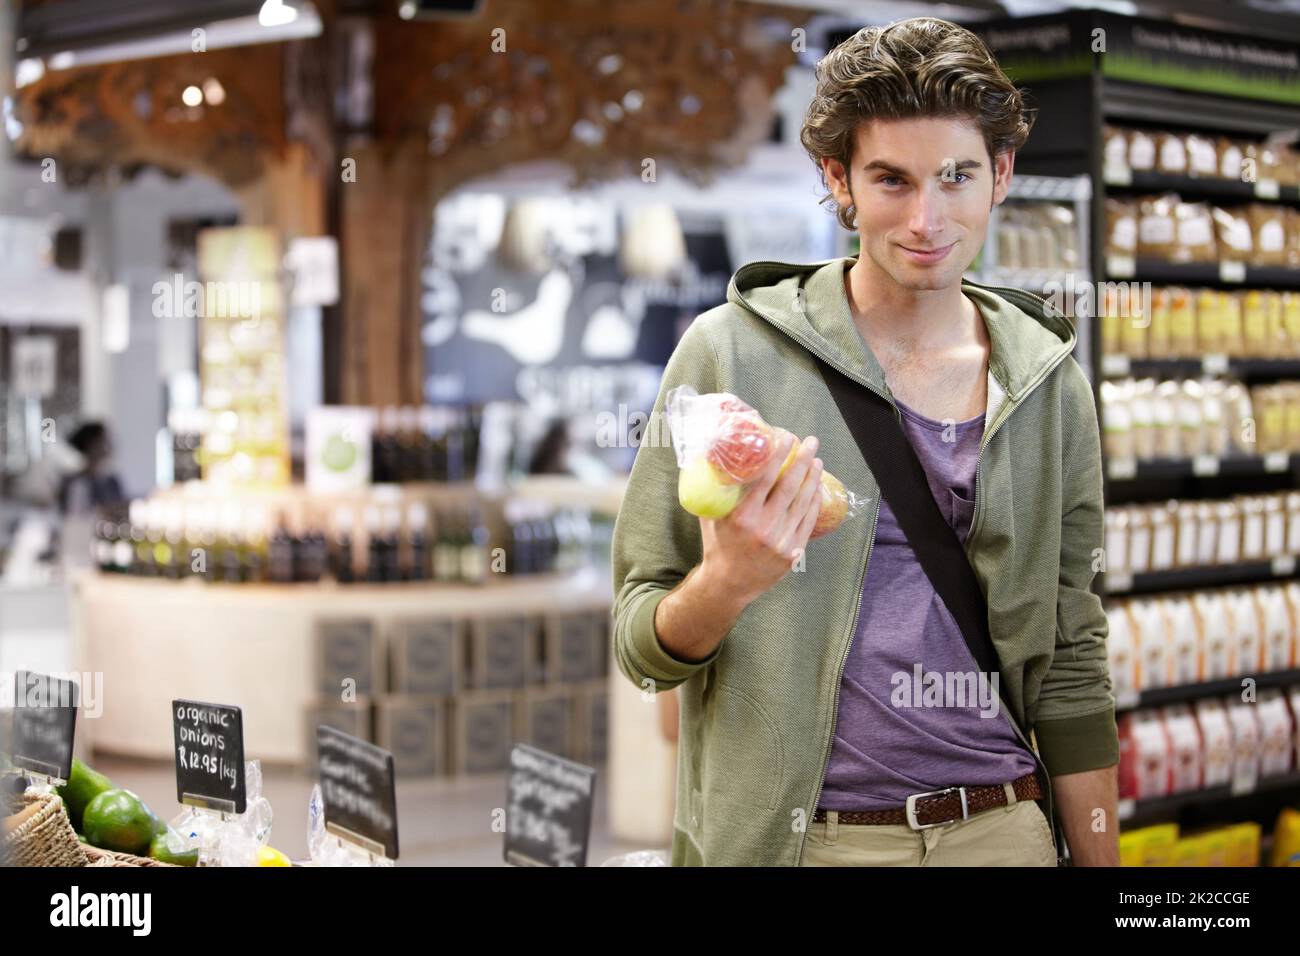 You know what they say, an apple a day.... A young man holding his bag of apples. Stock Photo